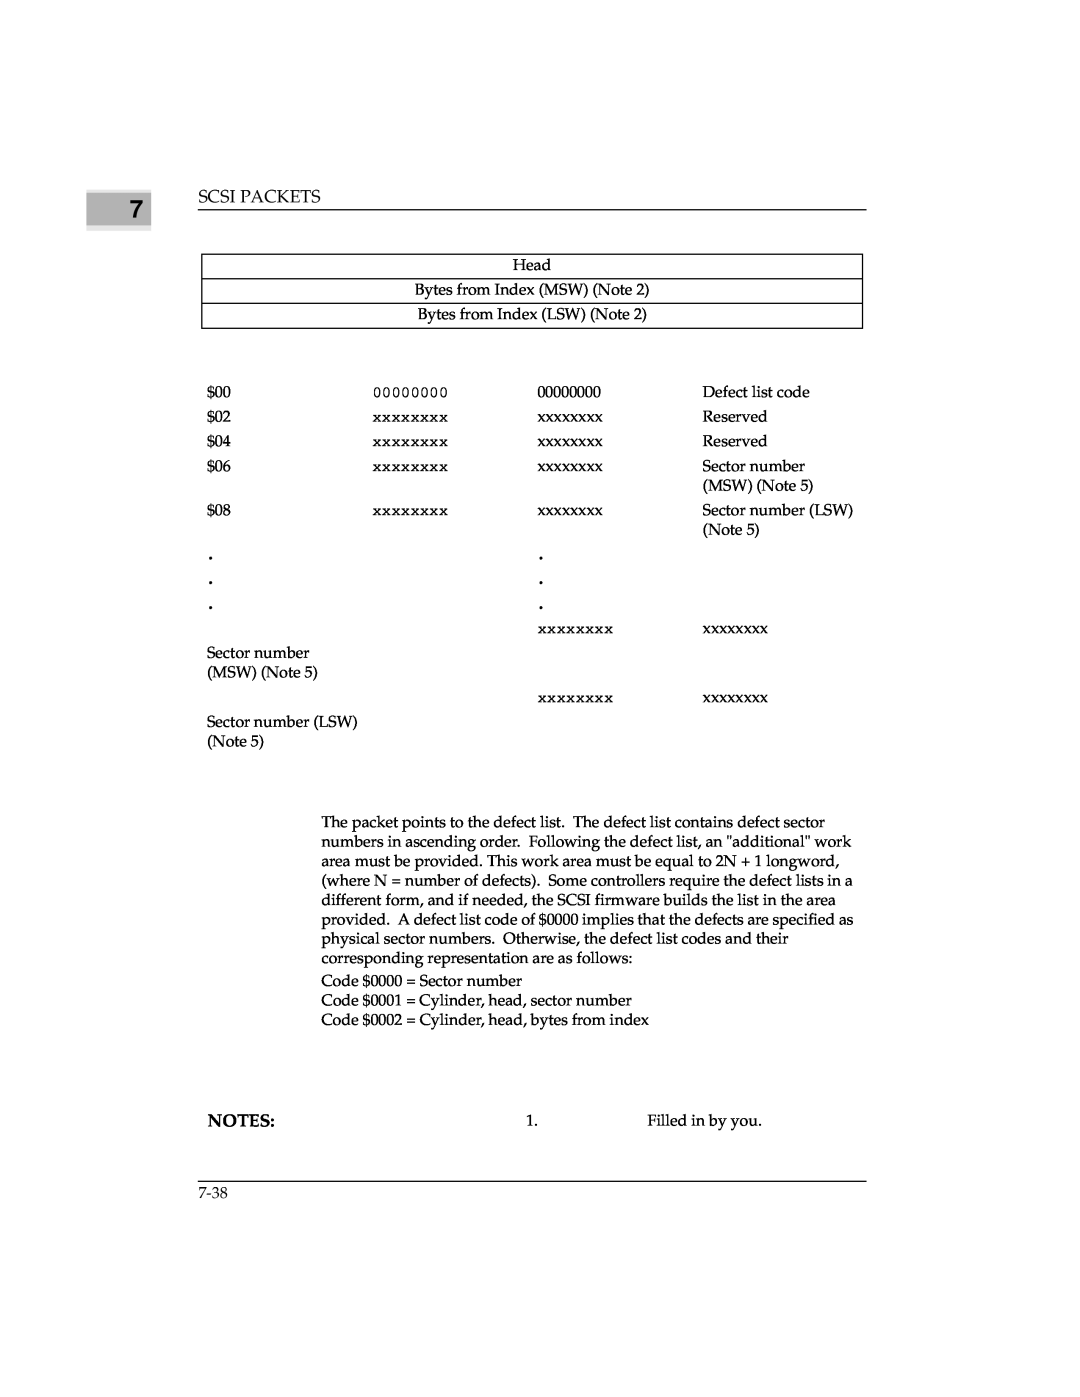 Emerson MVME147 manual Notes, Head Bytes from Index MSW Note 